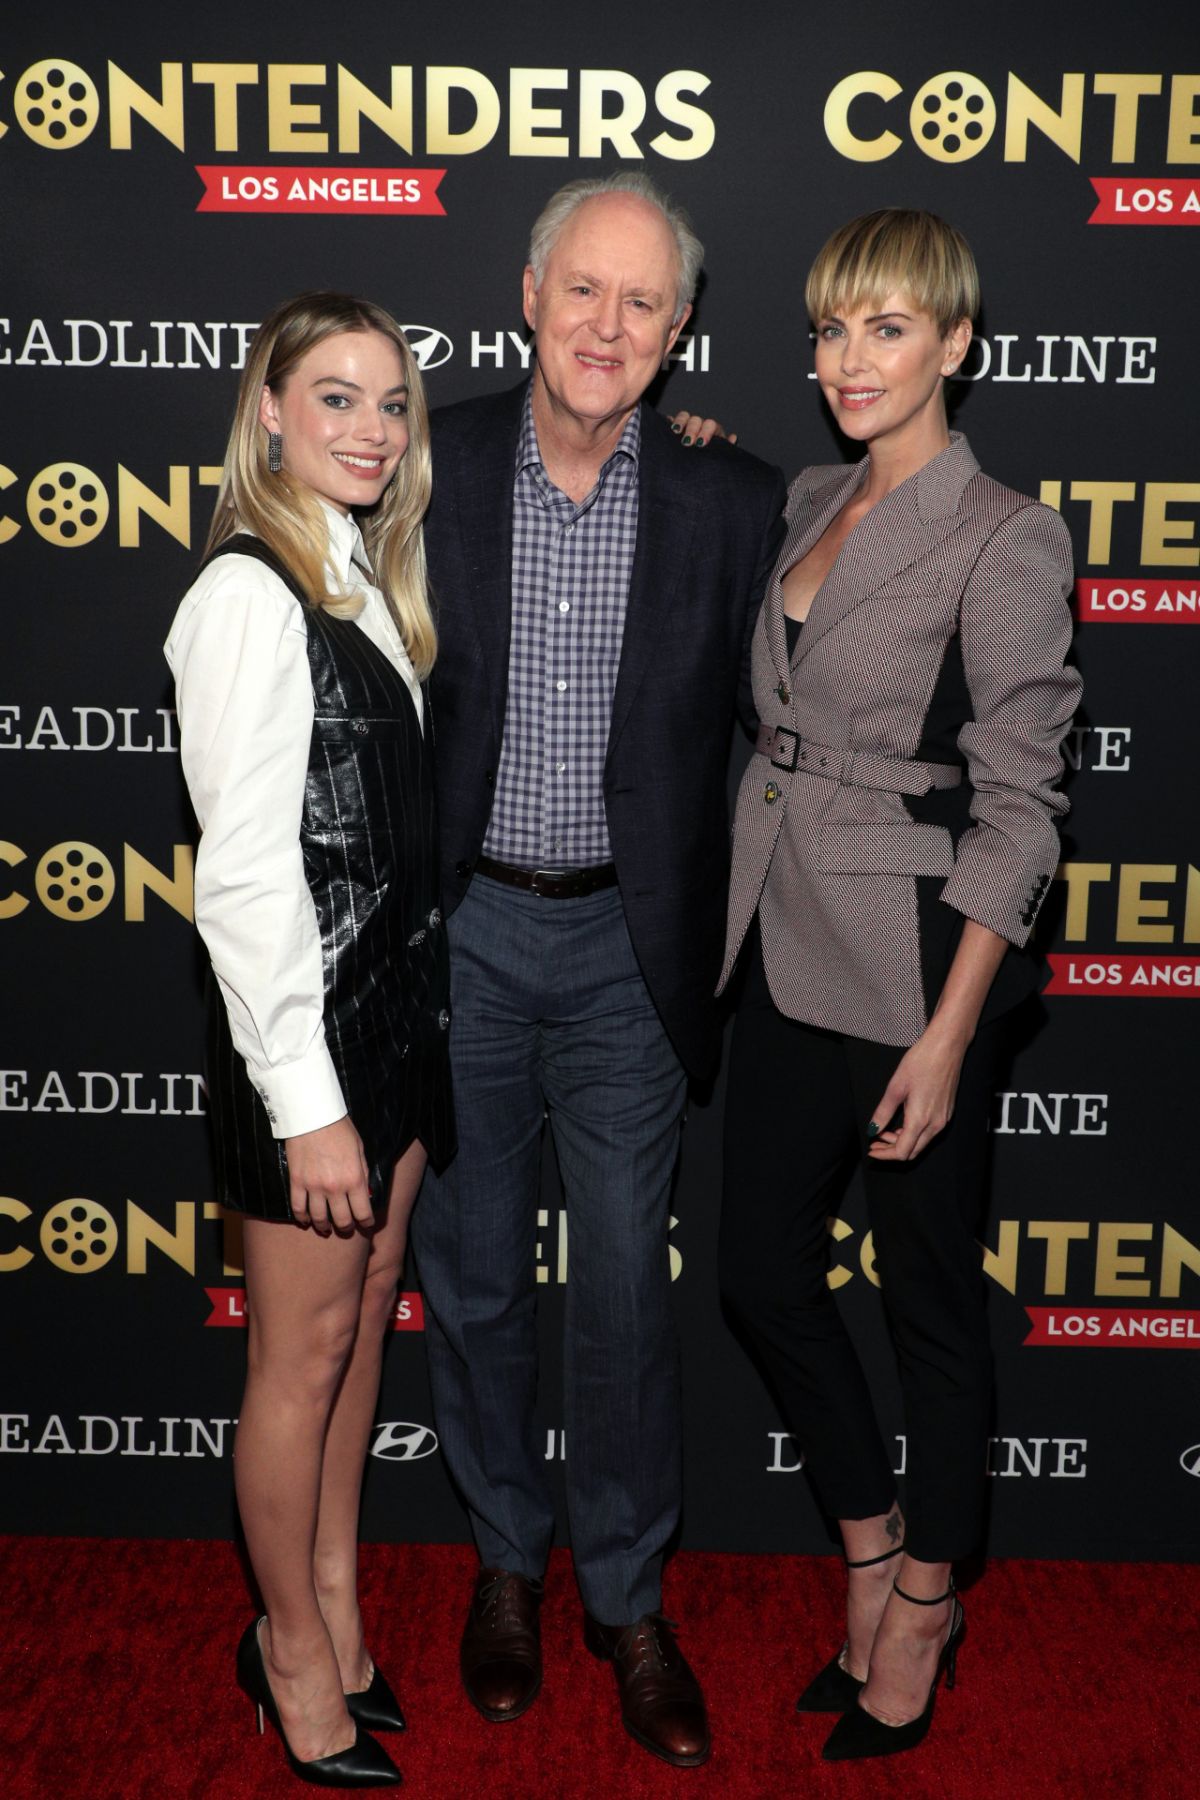 United States AI Solar System (13) - Page 11 Margot-robbie-and-charlize-theron-at-deadline-contenders-in-los-angeles-11-02-2019-1